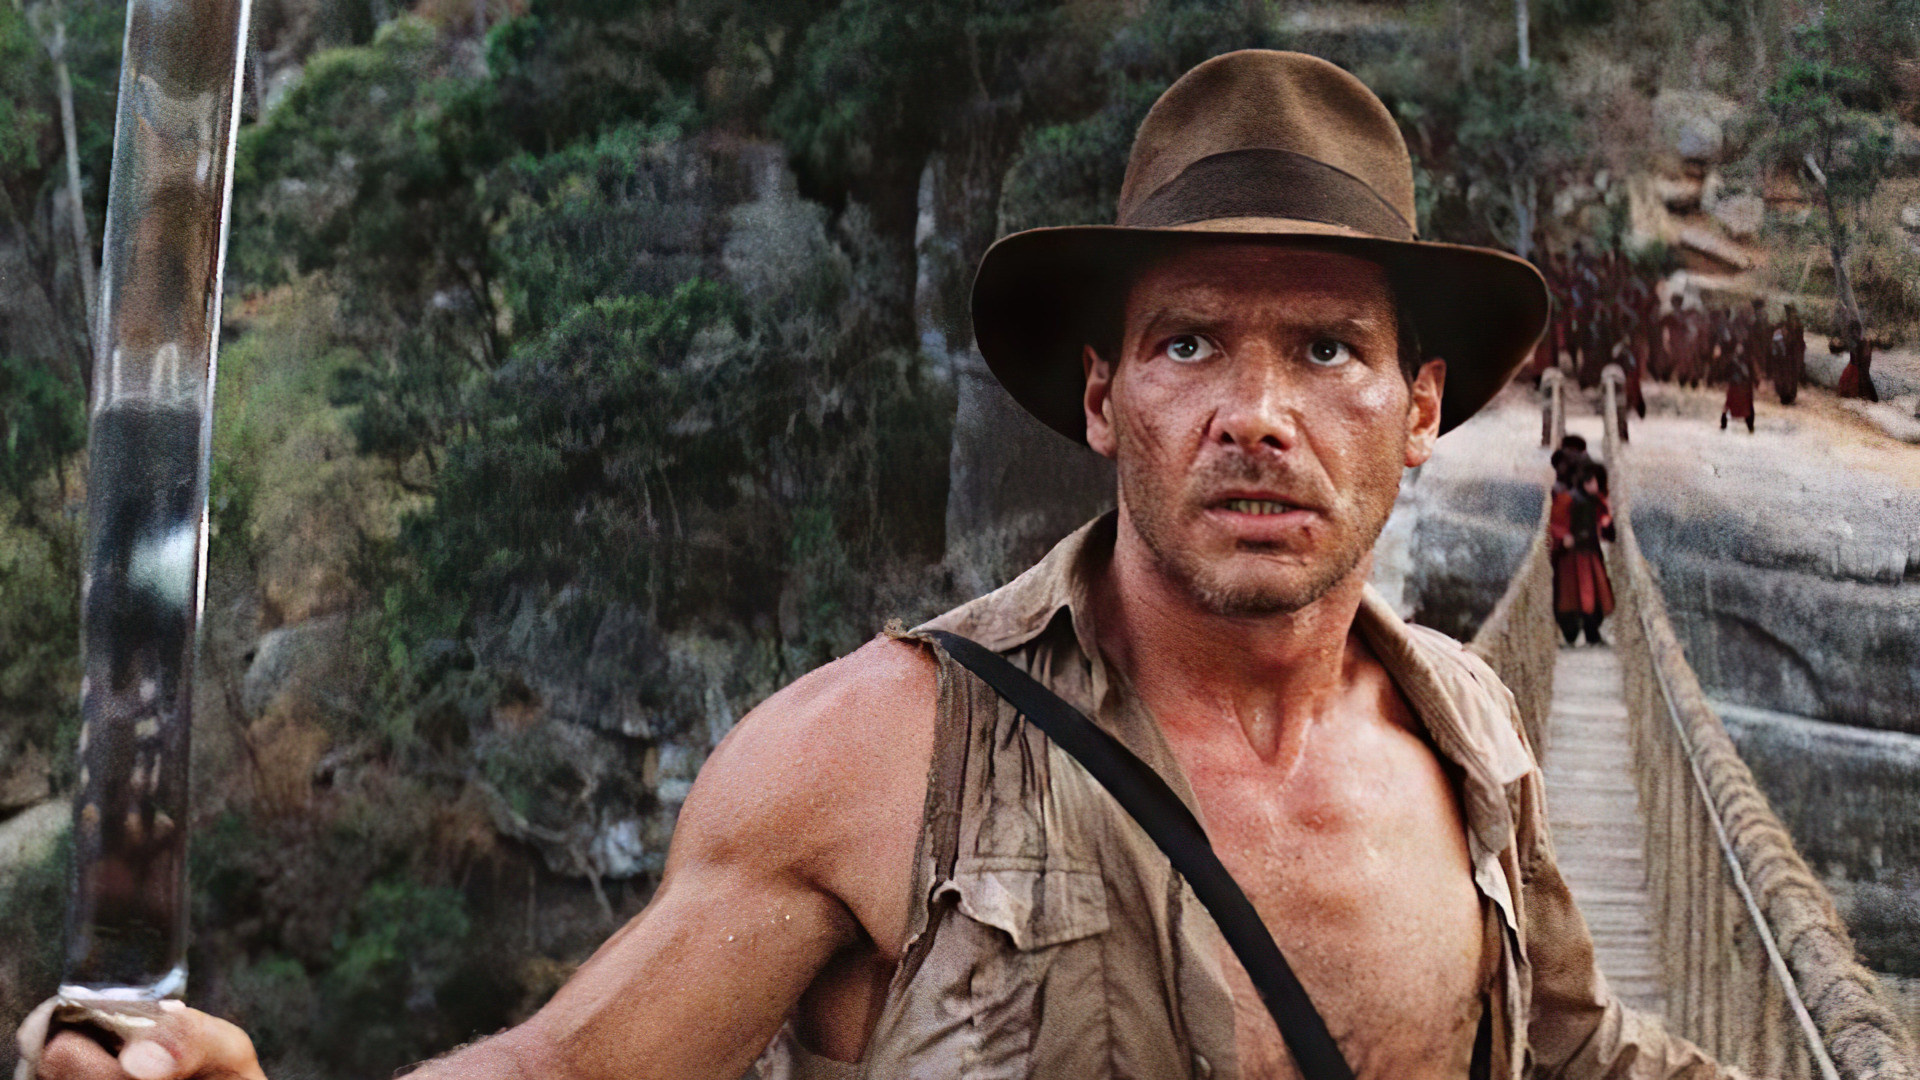 Harrison Ford (Indiana Jones): Ford's character in a series of successful adventure films directed by Steven Spielberg. 1920x1080 Full HD Background.